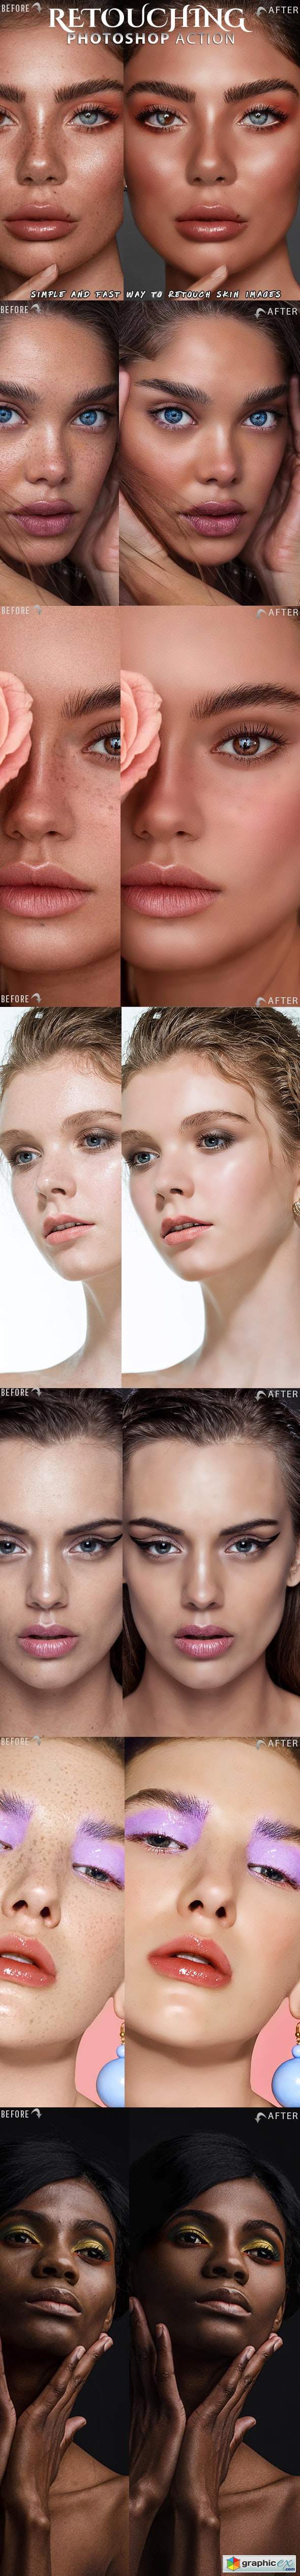 Skin Retouch Photoshop Action